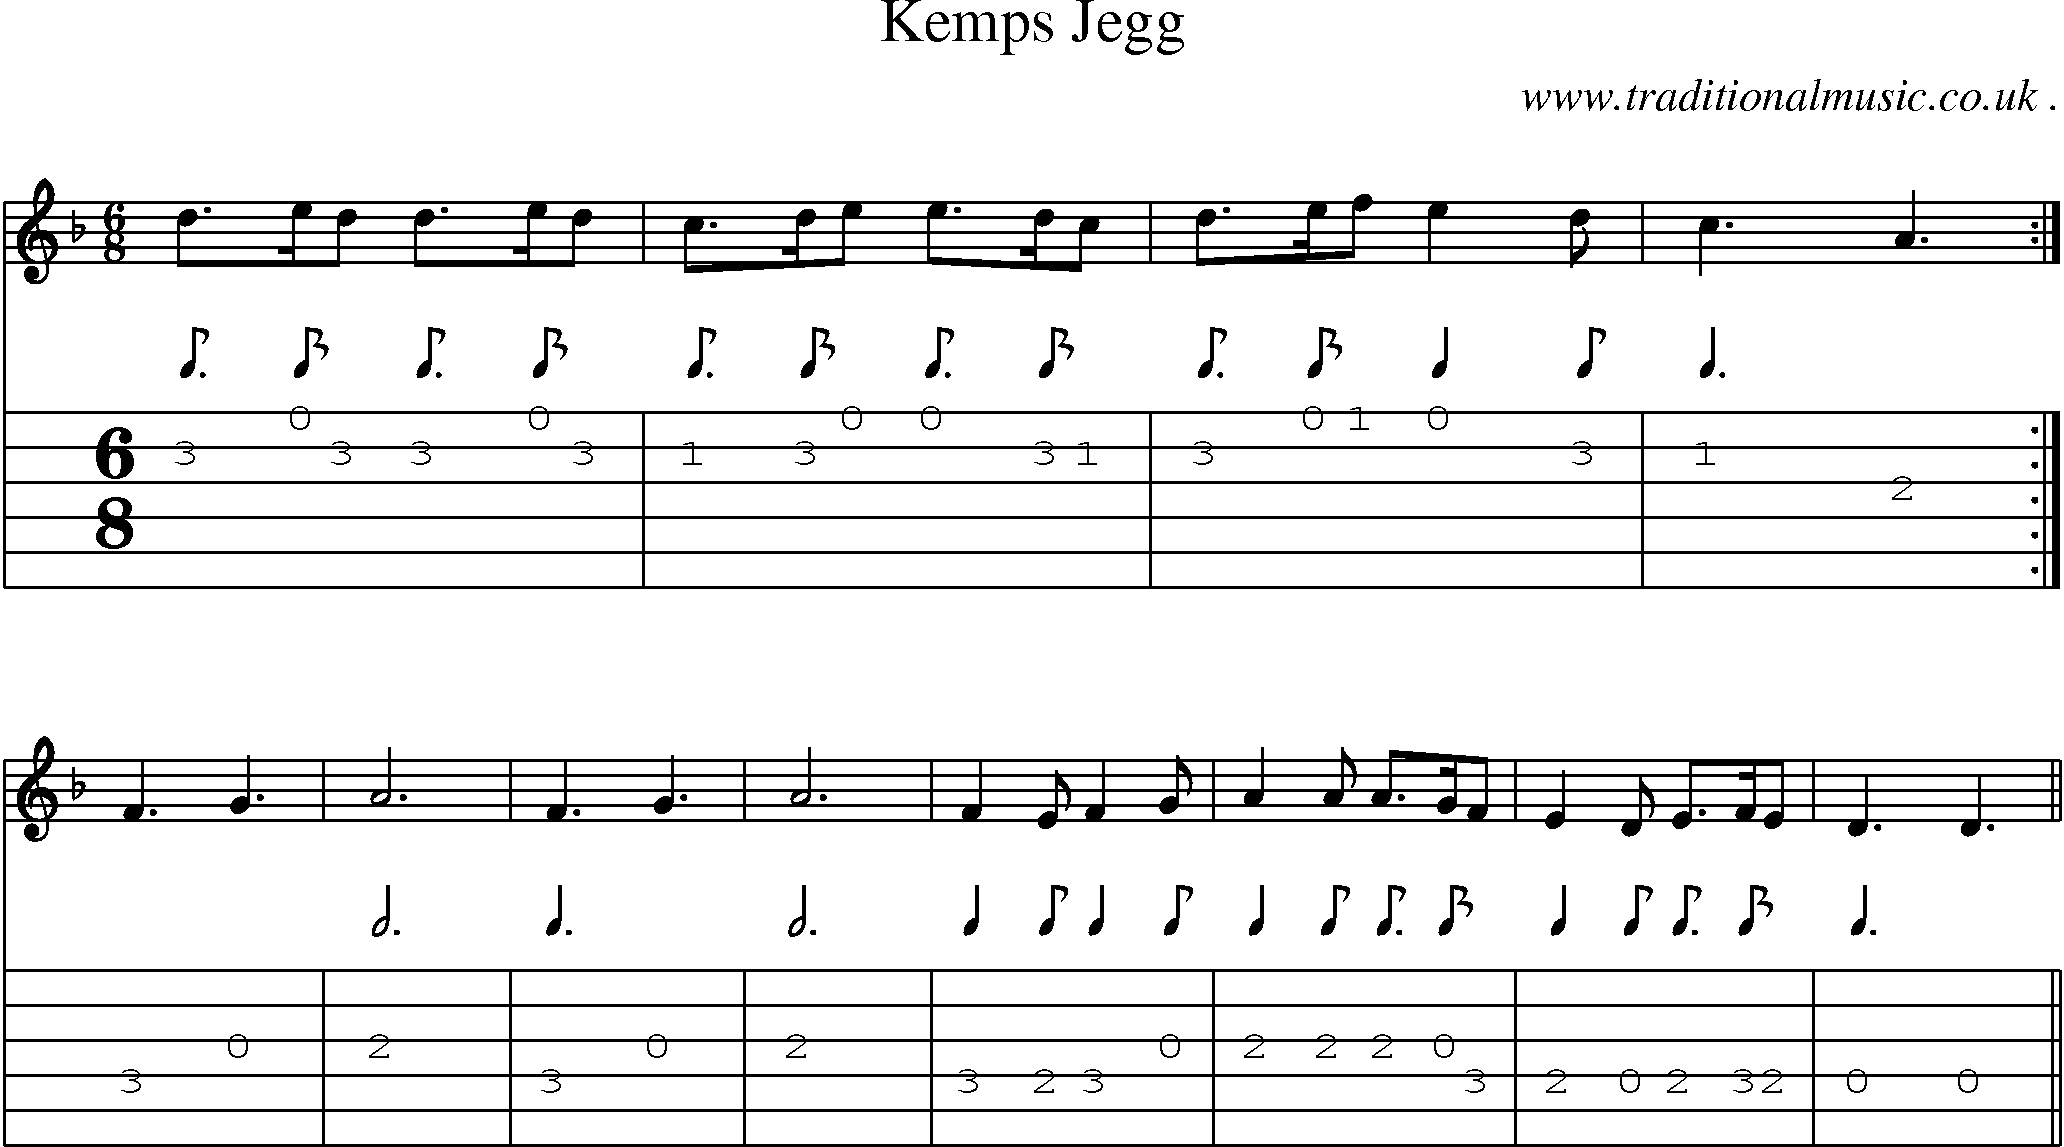 Sheet-music  score, Chords and Guitar Tabs for Kemps Jegg